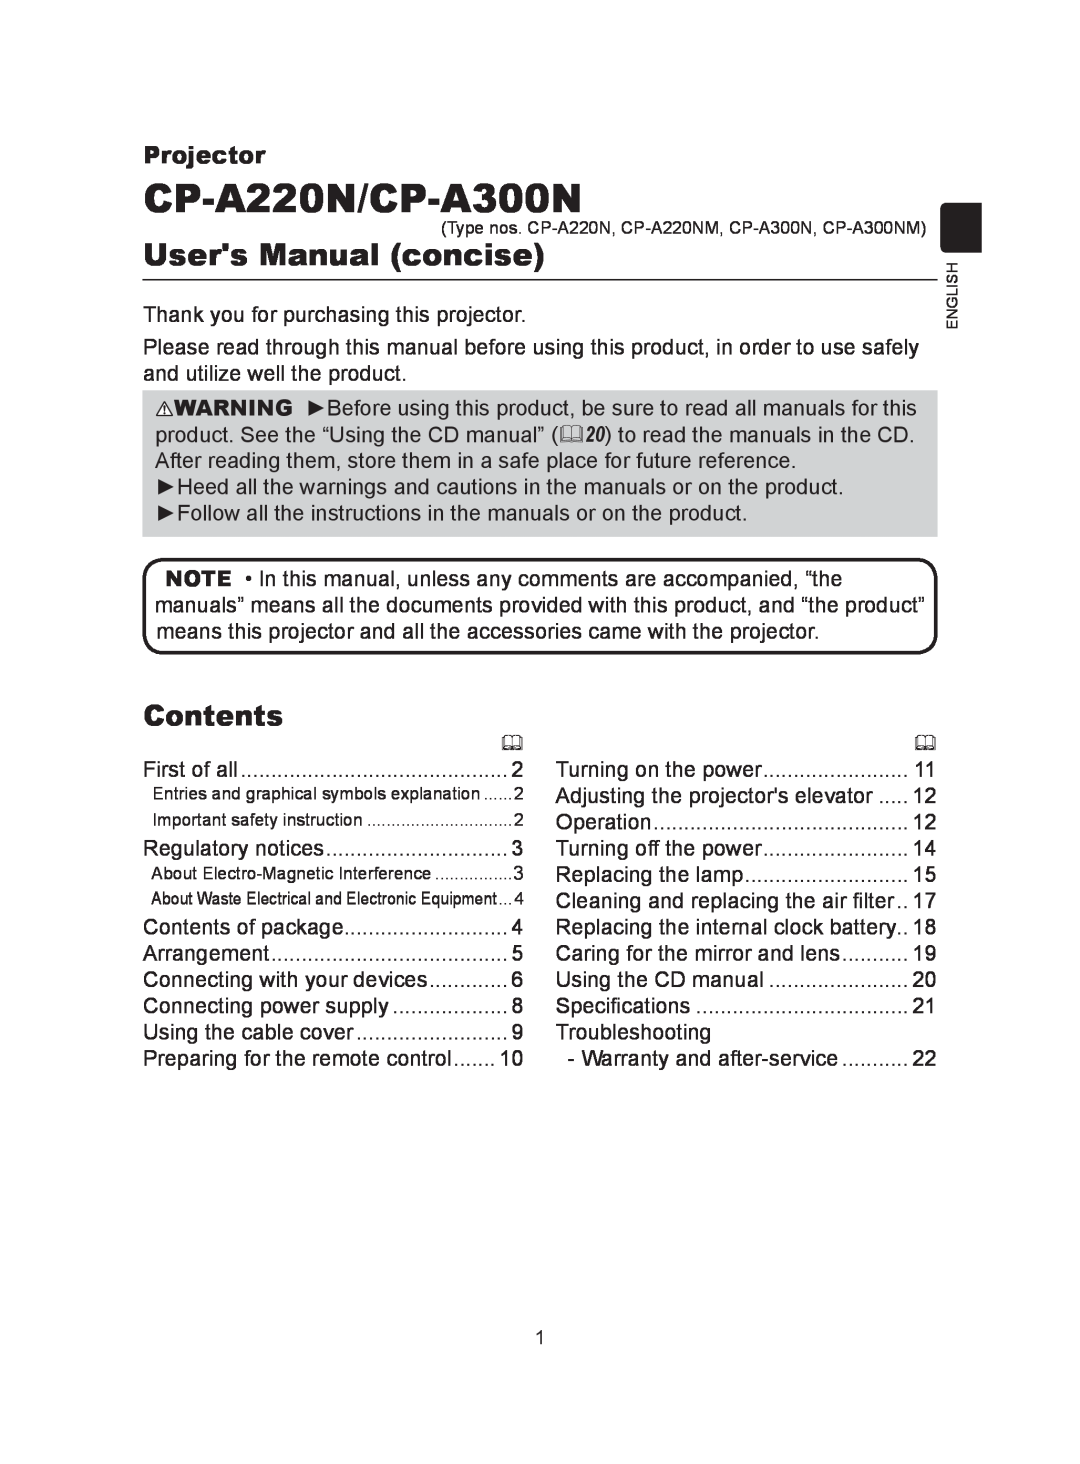 Hitachi user manual Contents, Projector, CP-A220N/CP-A300N, Users Manual concise 